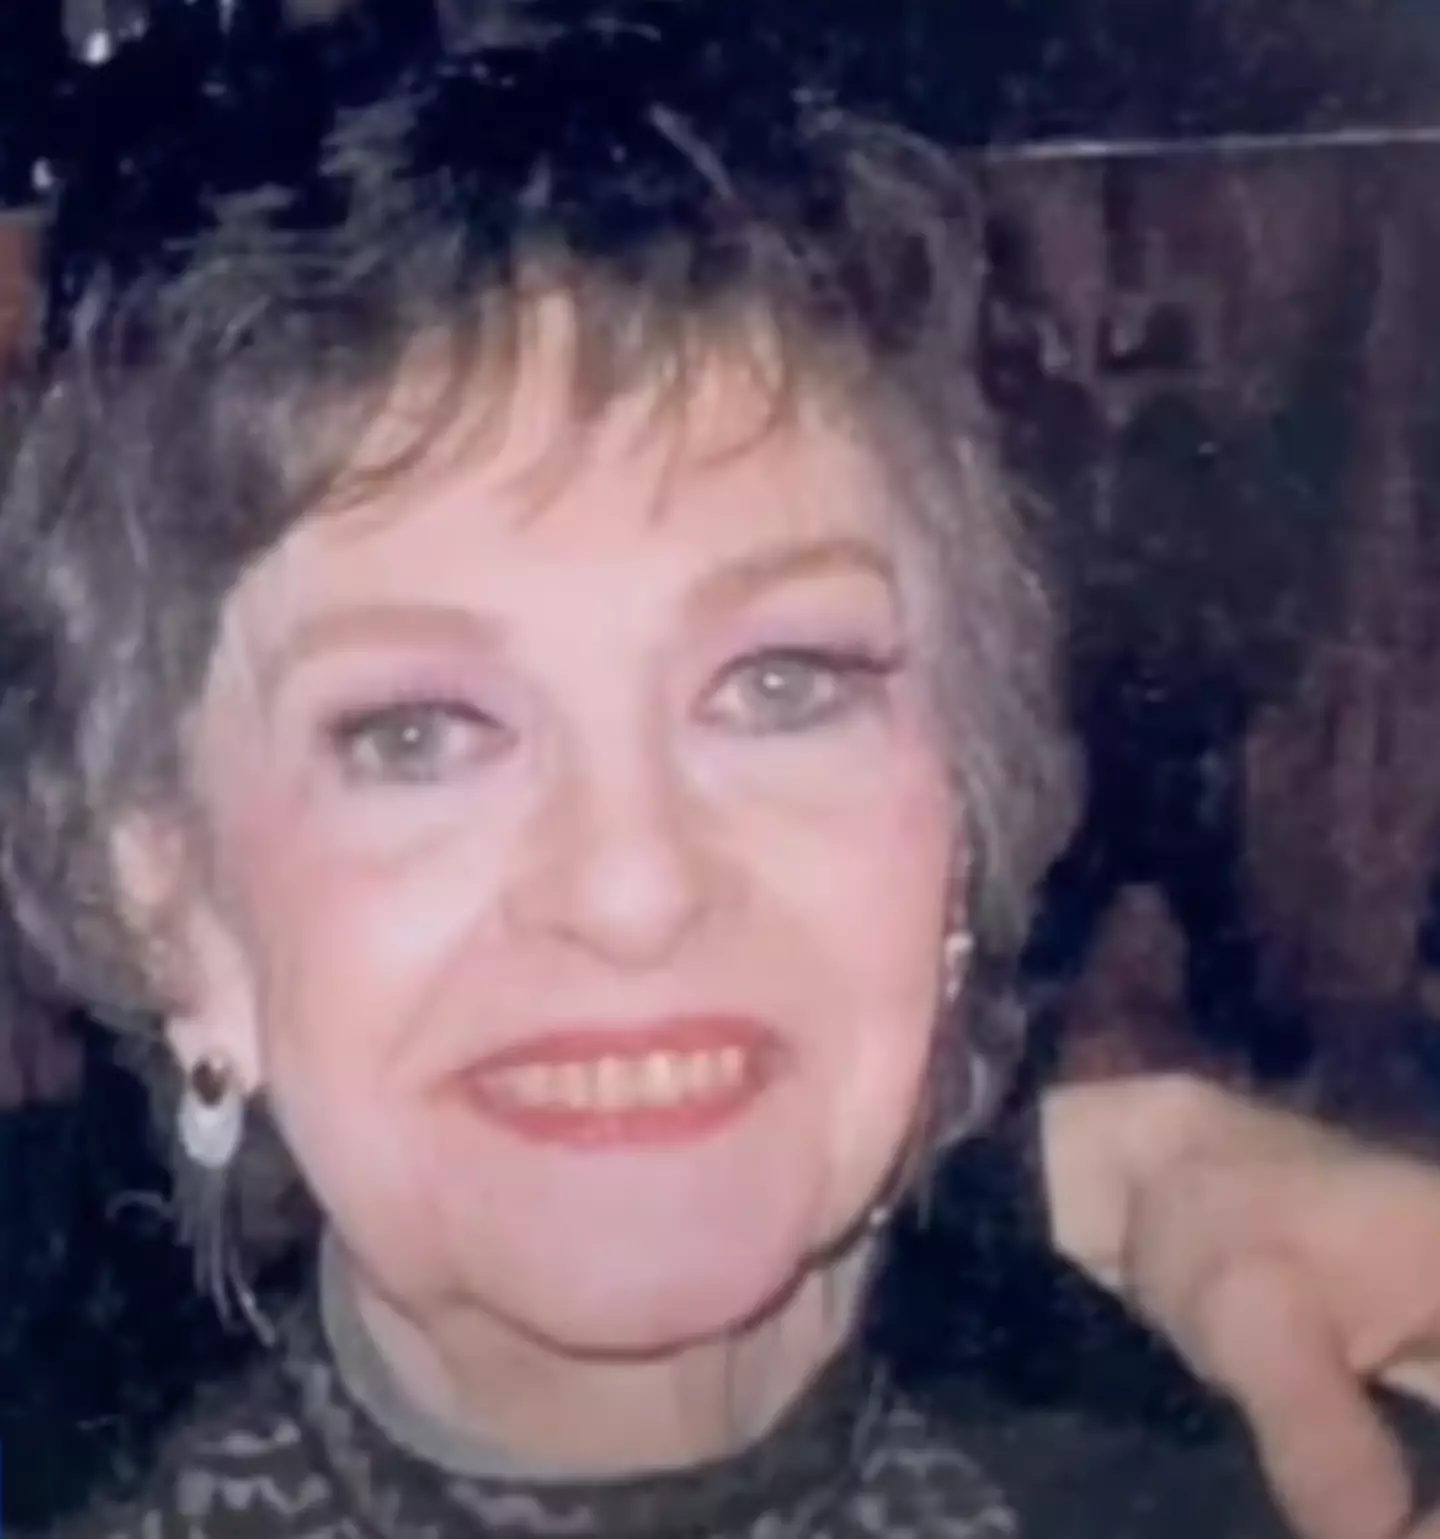 Barbara Gustern was 87-years-old when she died after being pushed to the ground in the street.